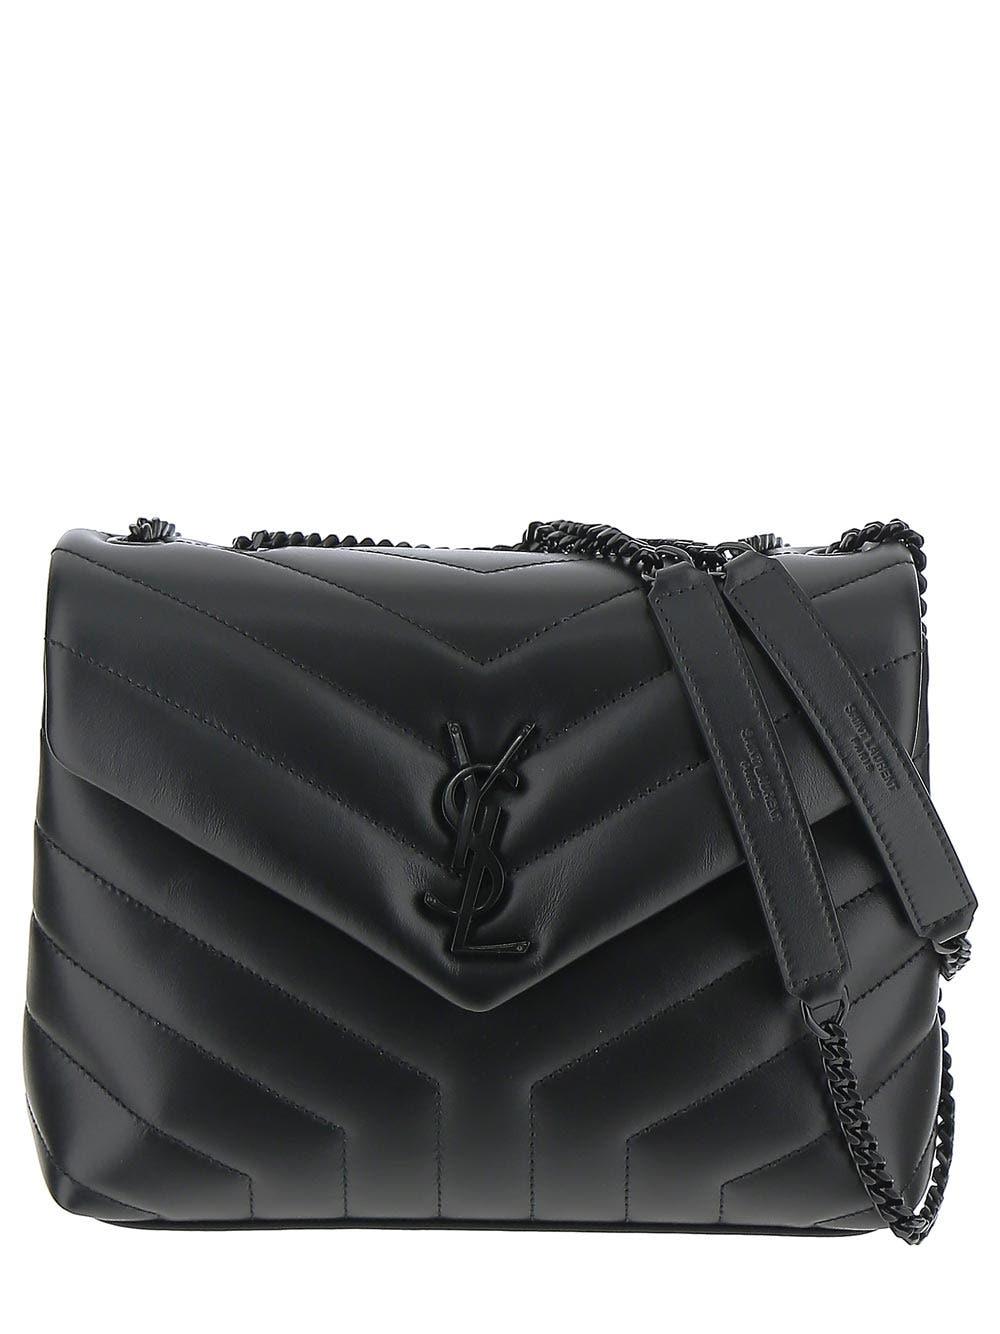 Saint Laurent Loulou Small Chain Bag In Matelassè "y" Leather in Black |  Lyst